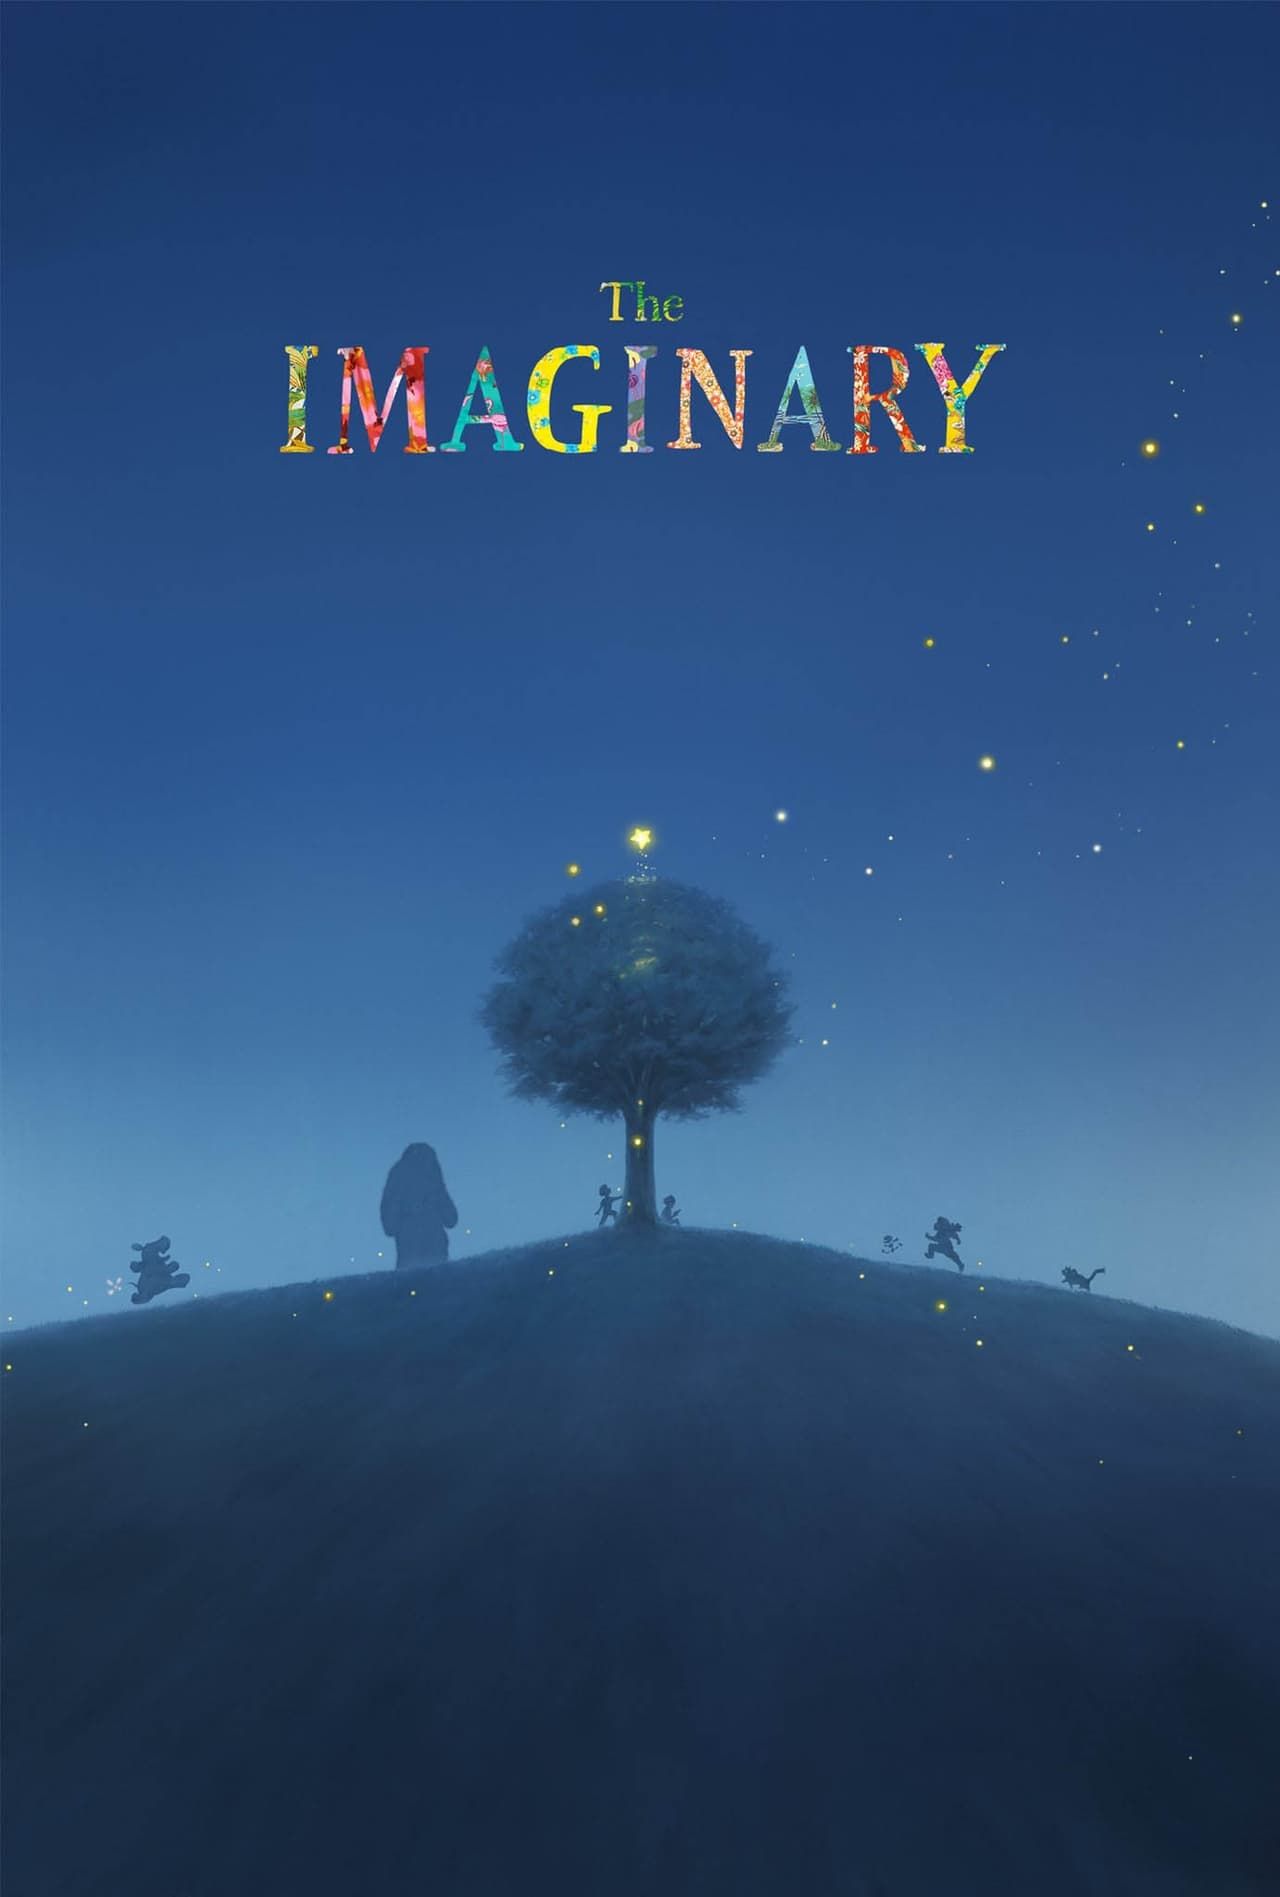 The Imaginary_Movie_Poster